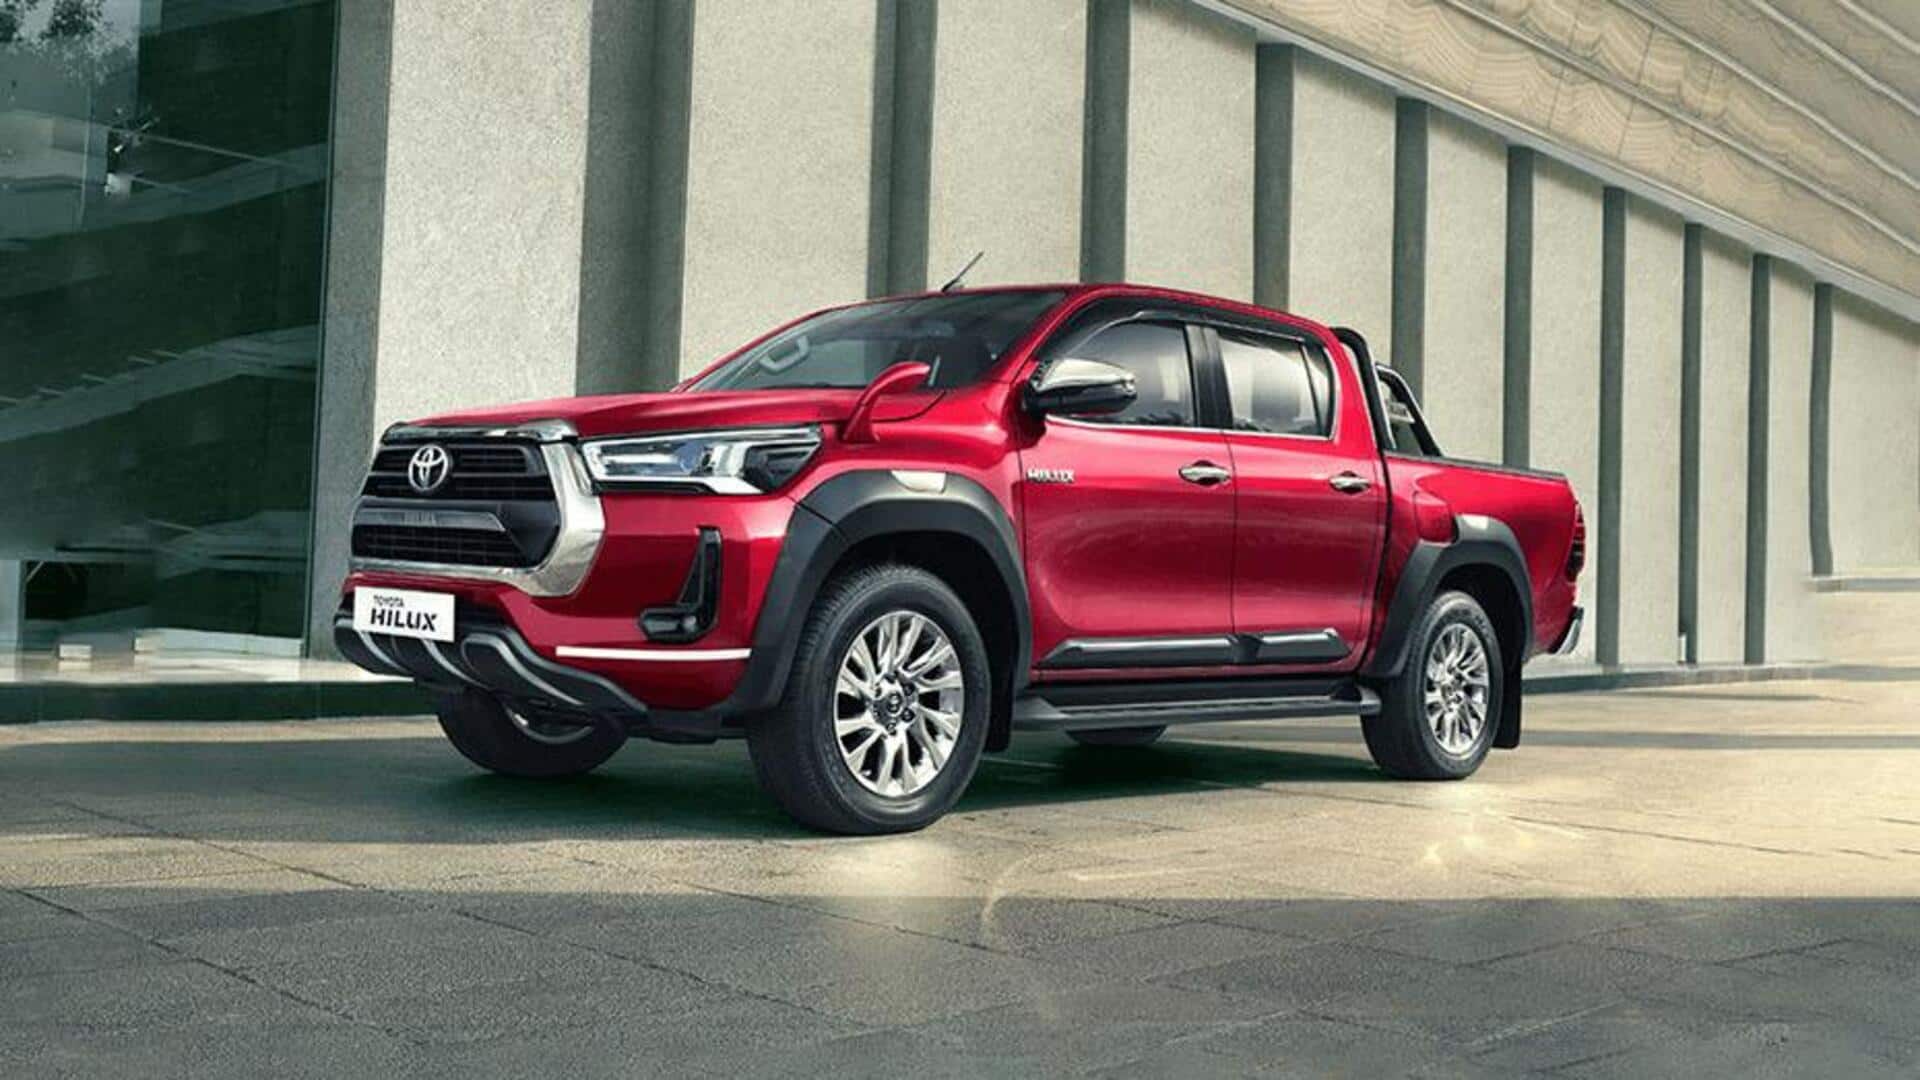 Everything we know about Kia's Toyota Hilux rival in India